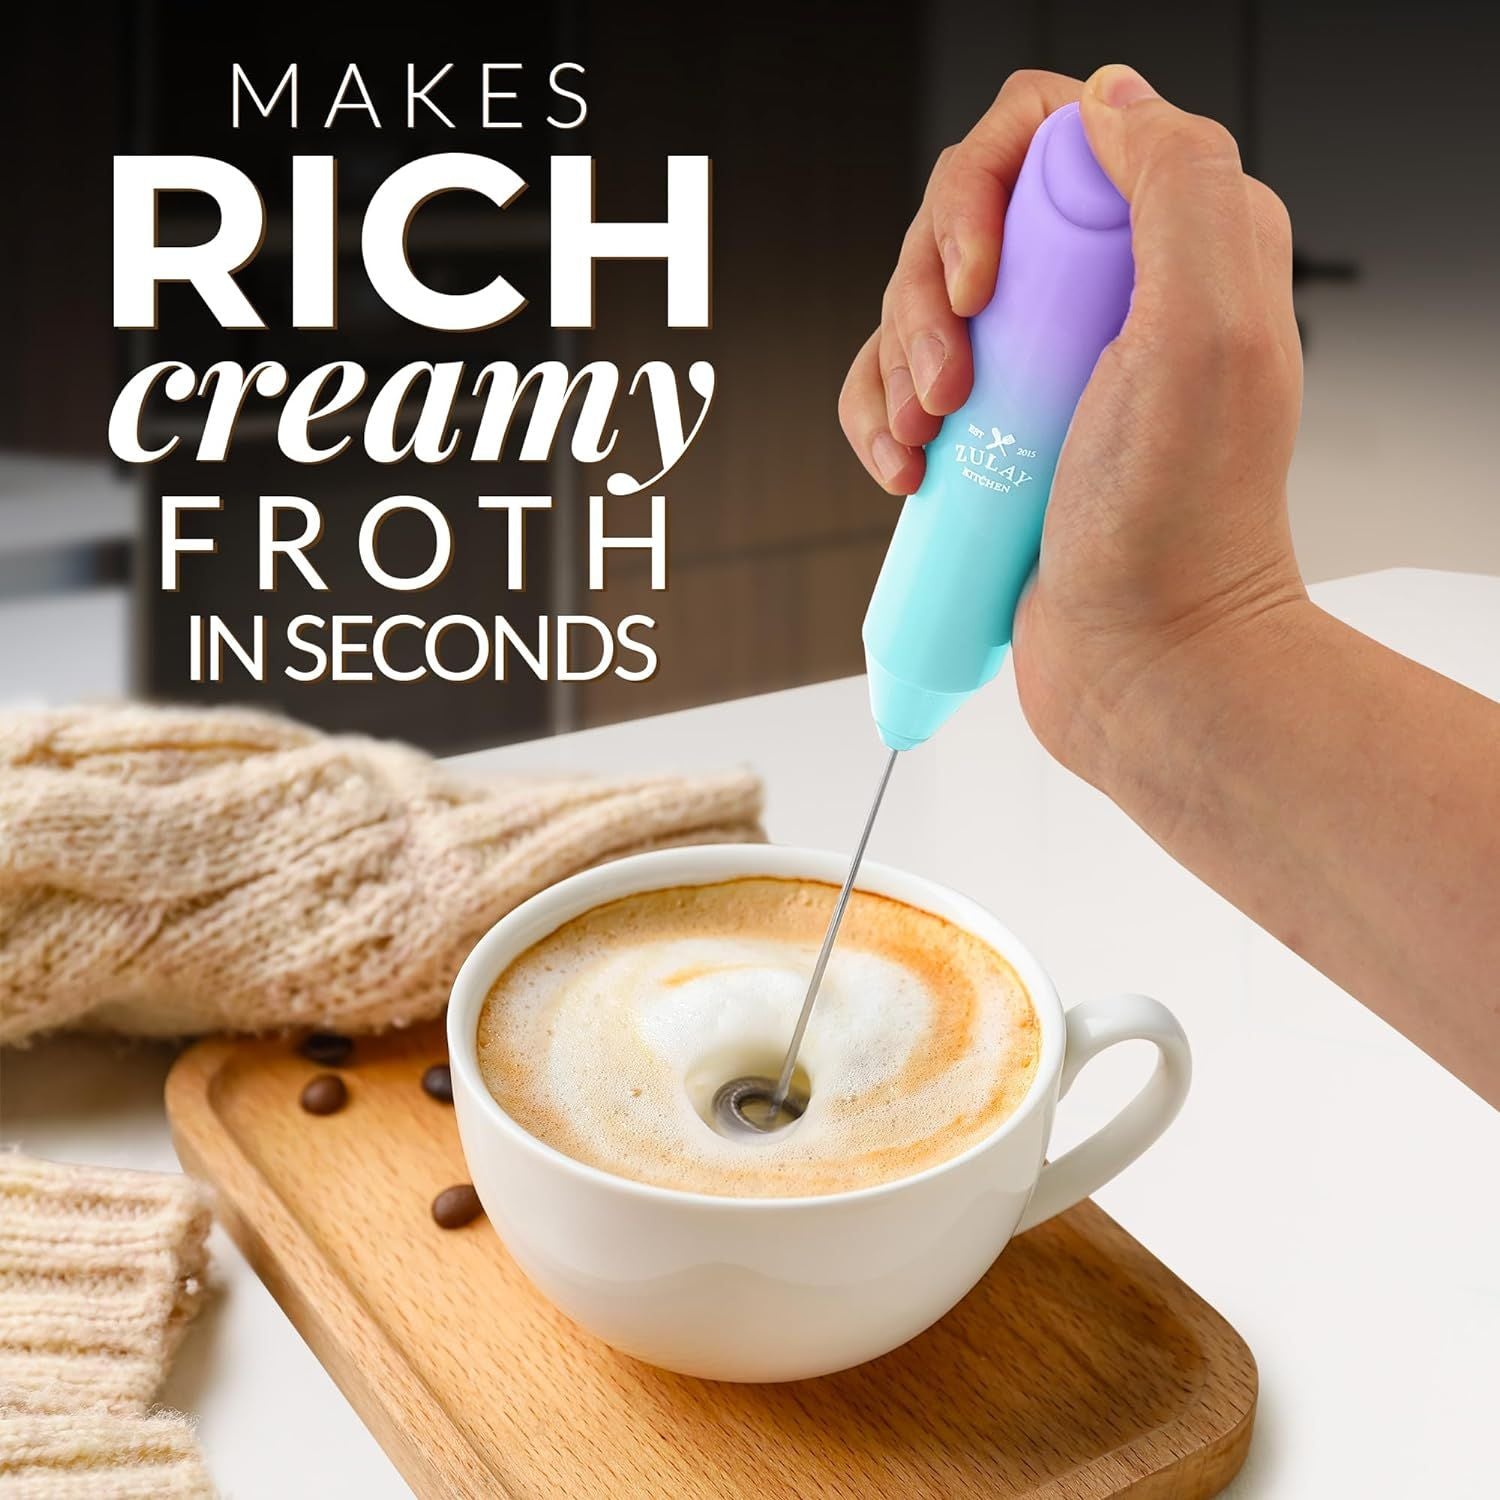 FrothMate Milk Frother Without Stand - Powerful Handheld Frother for lattes, cappuccinos, matcha, hot chocolate